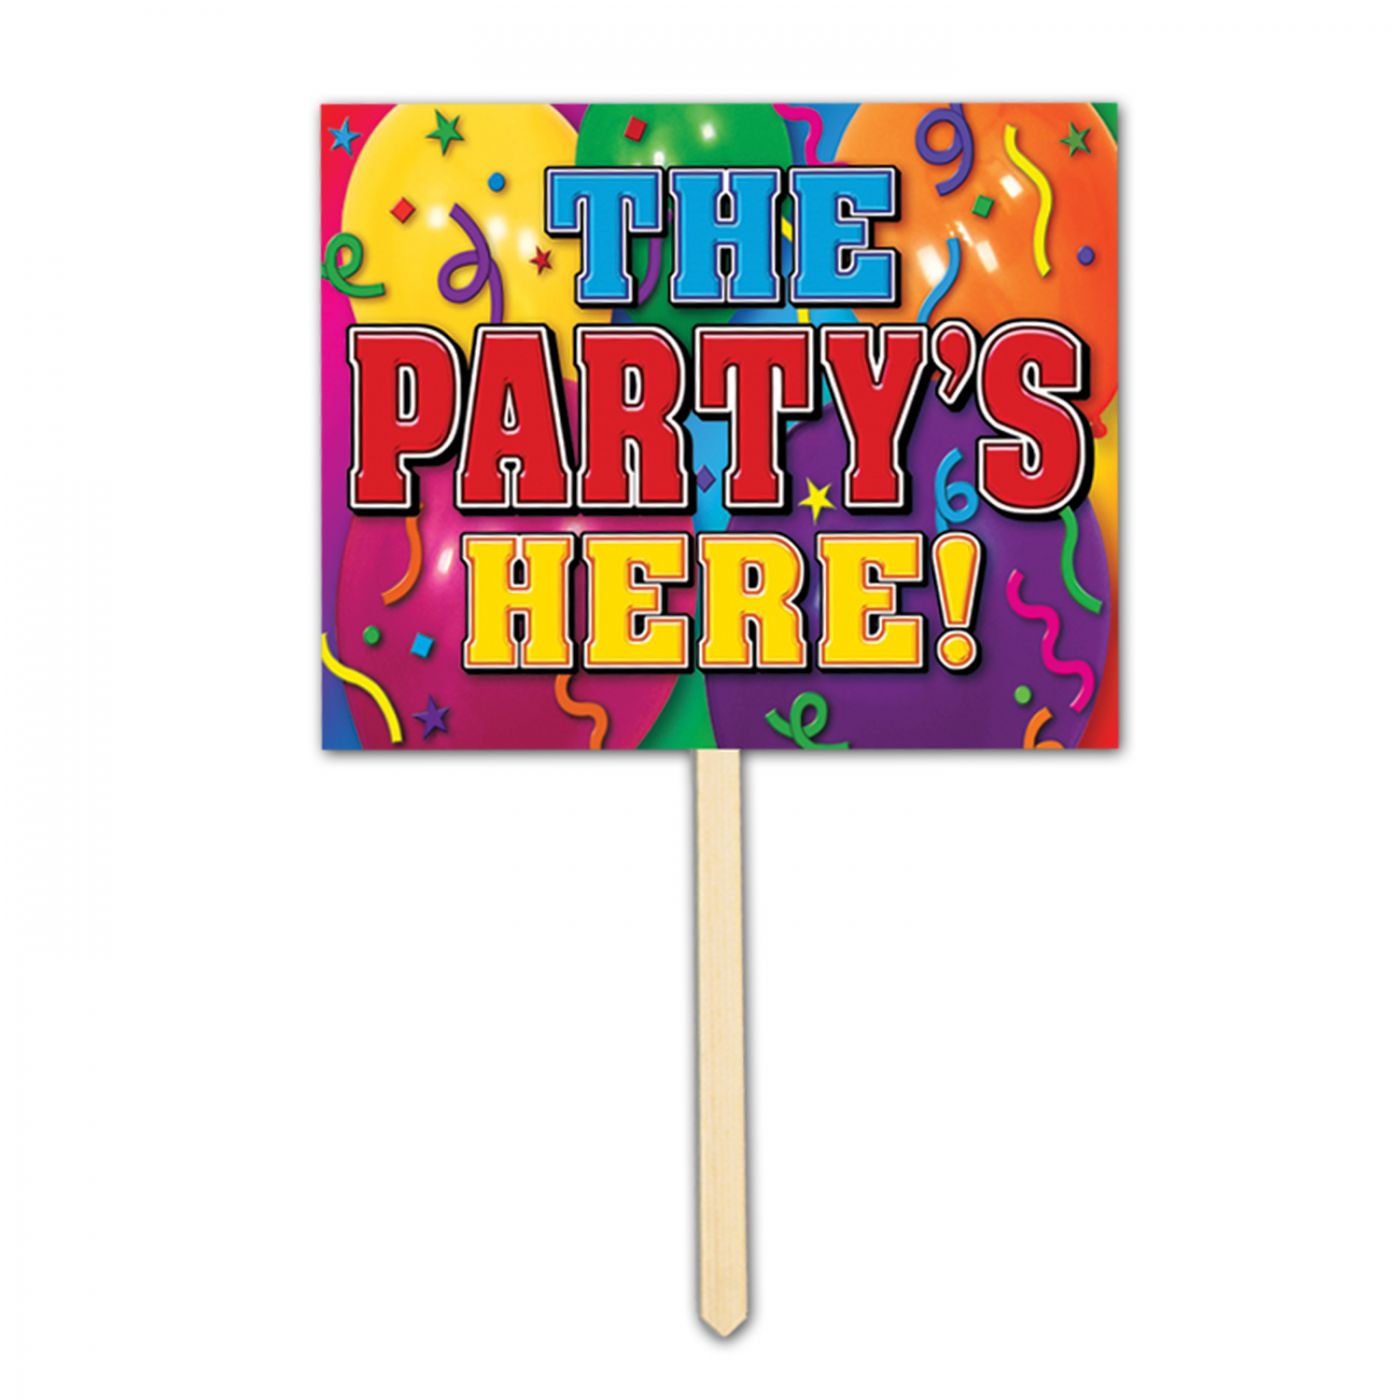 The Party's Here! Yard Sign (6) image